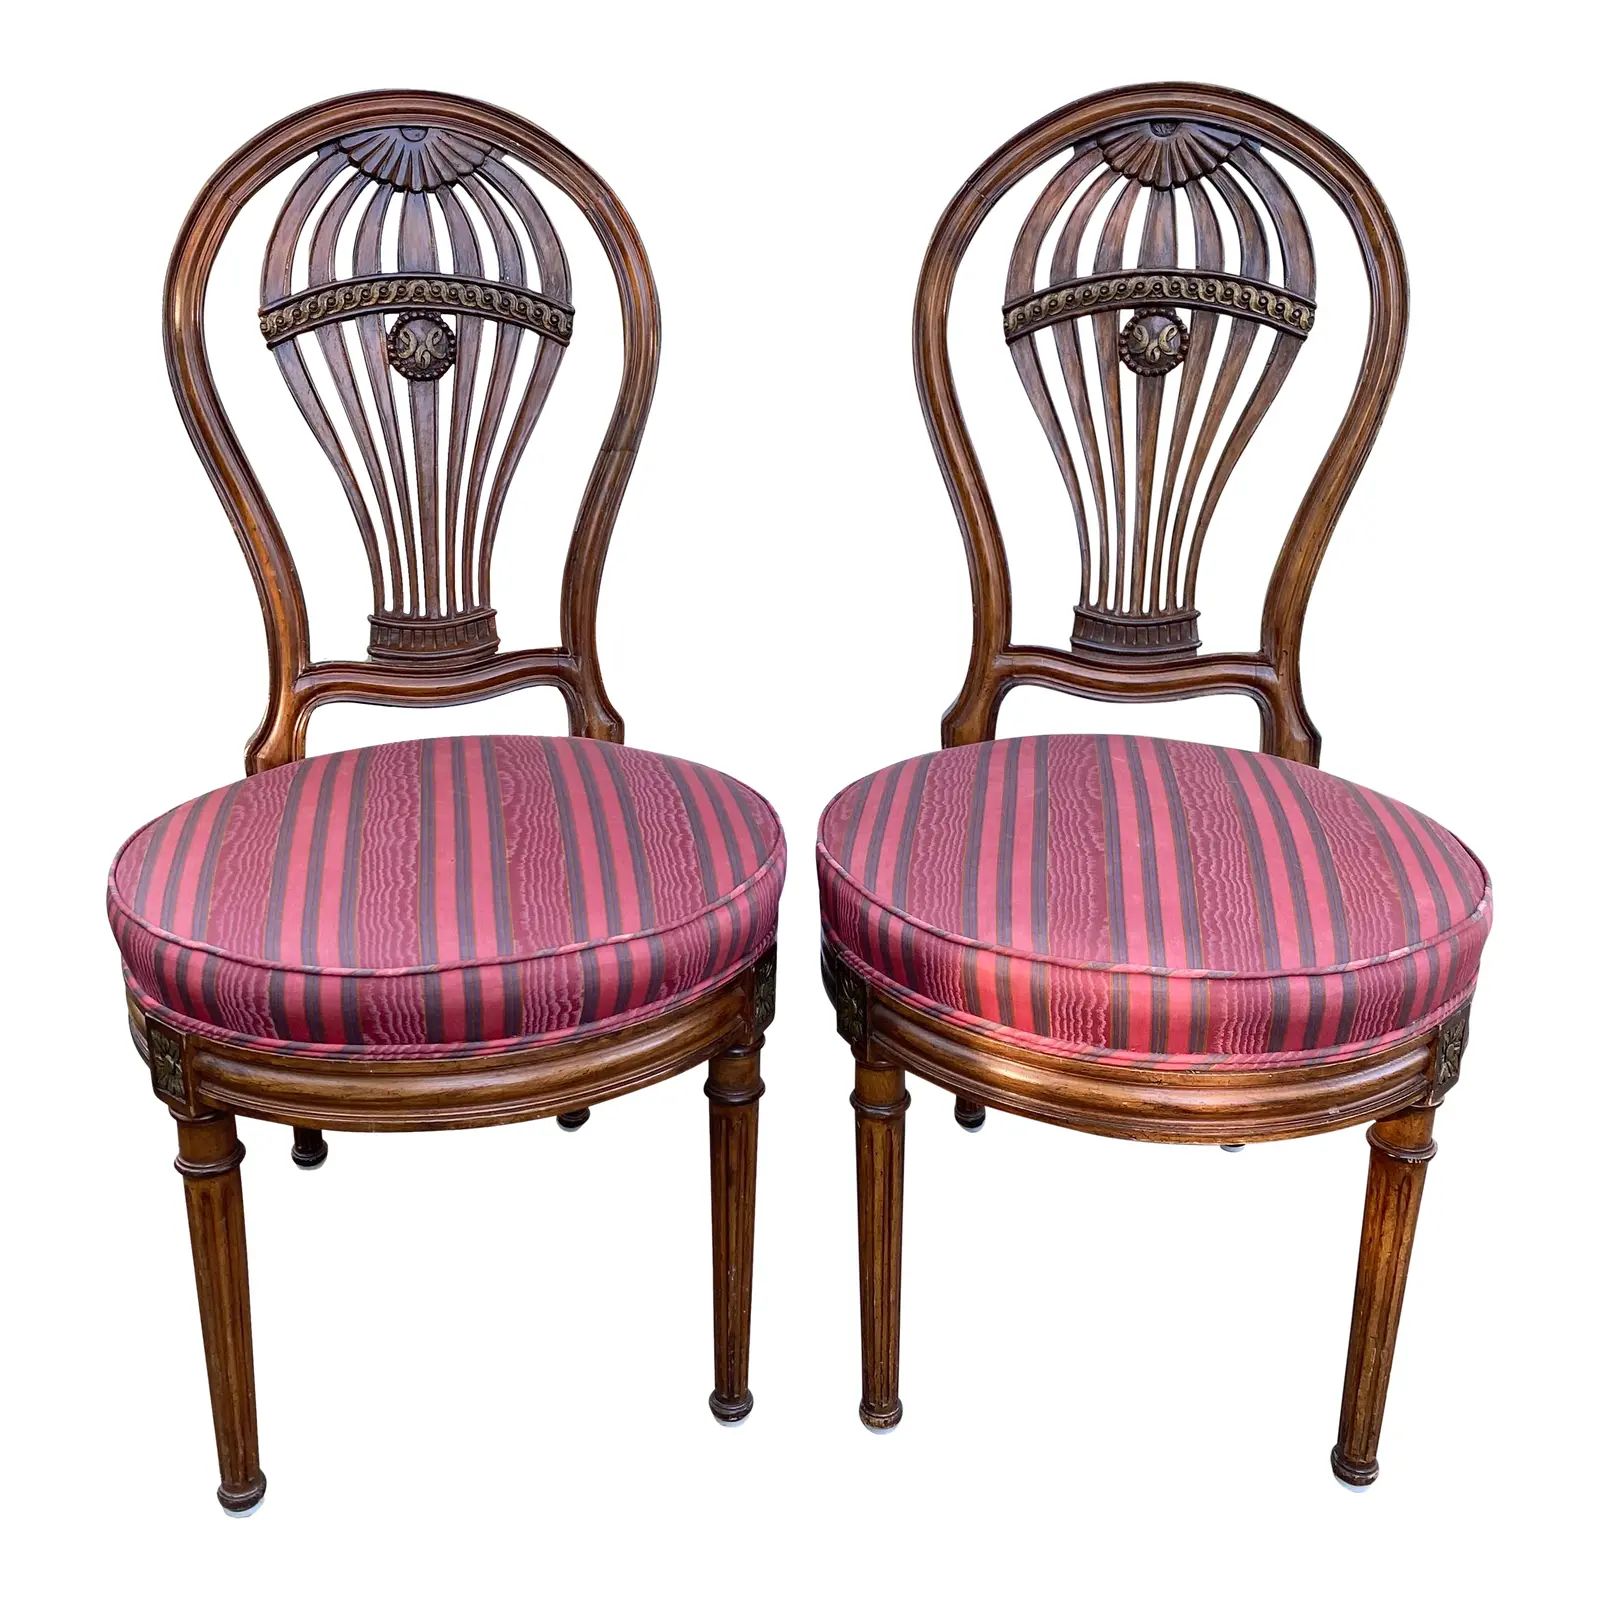 Early 20th Century French Louis XVI Montgolfier Hot Air Balloon Back Side Chair - a Pair | Chairish